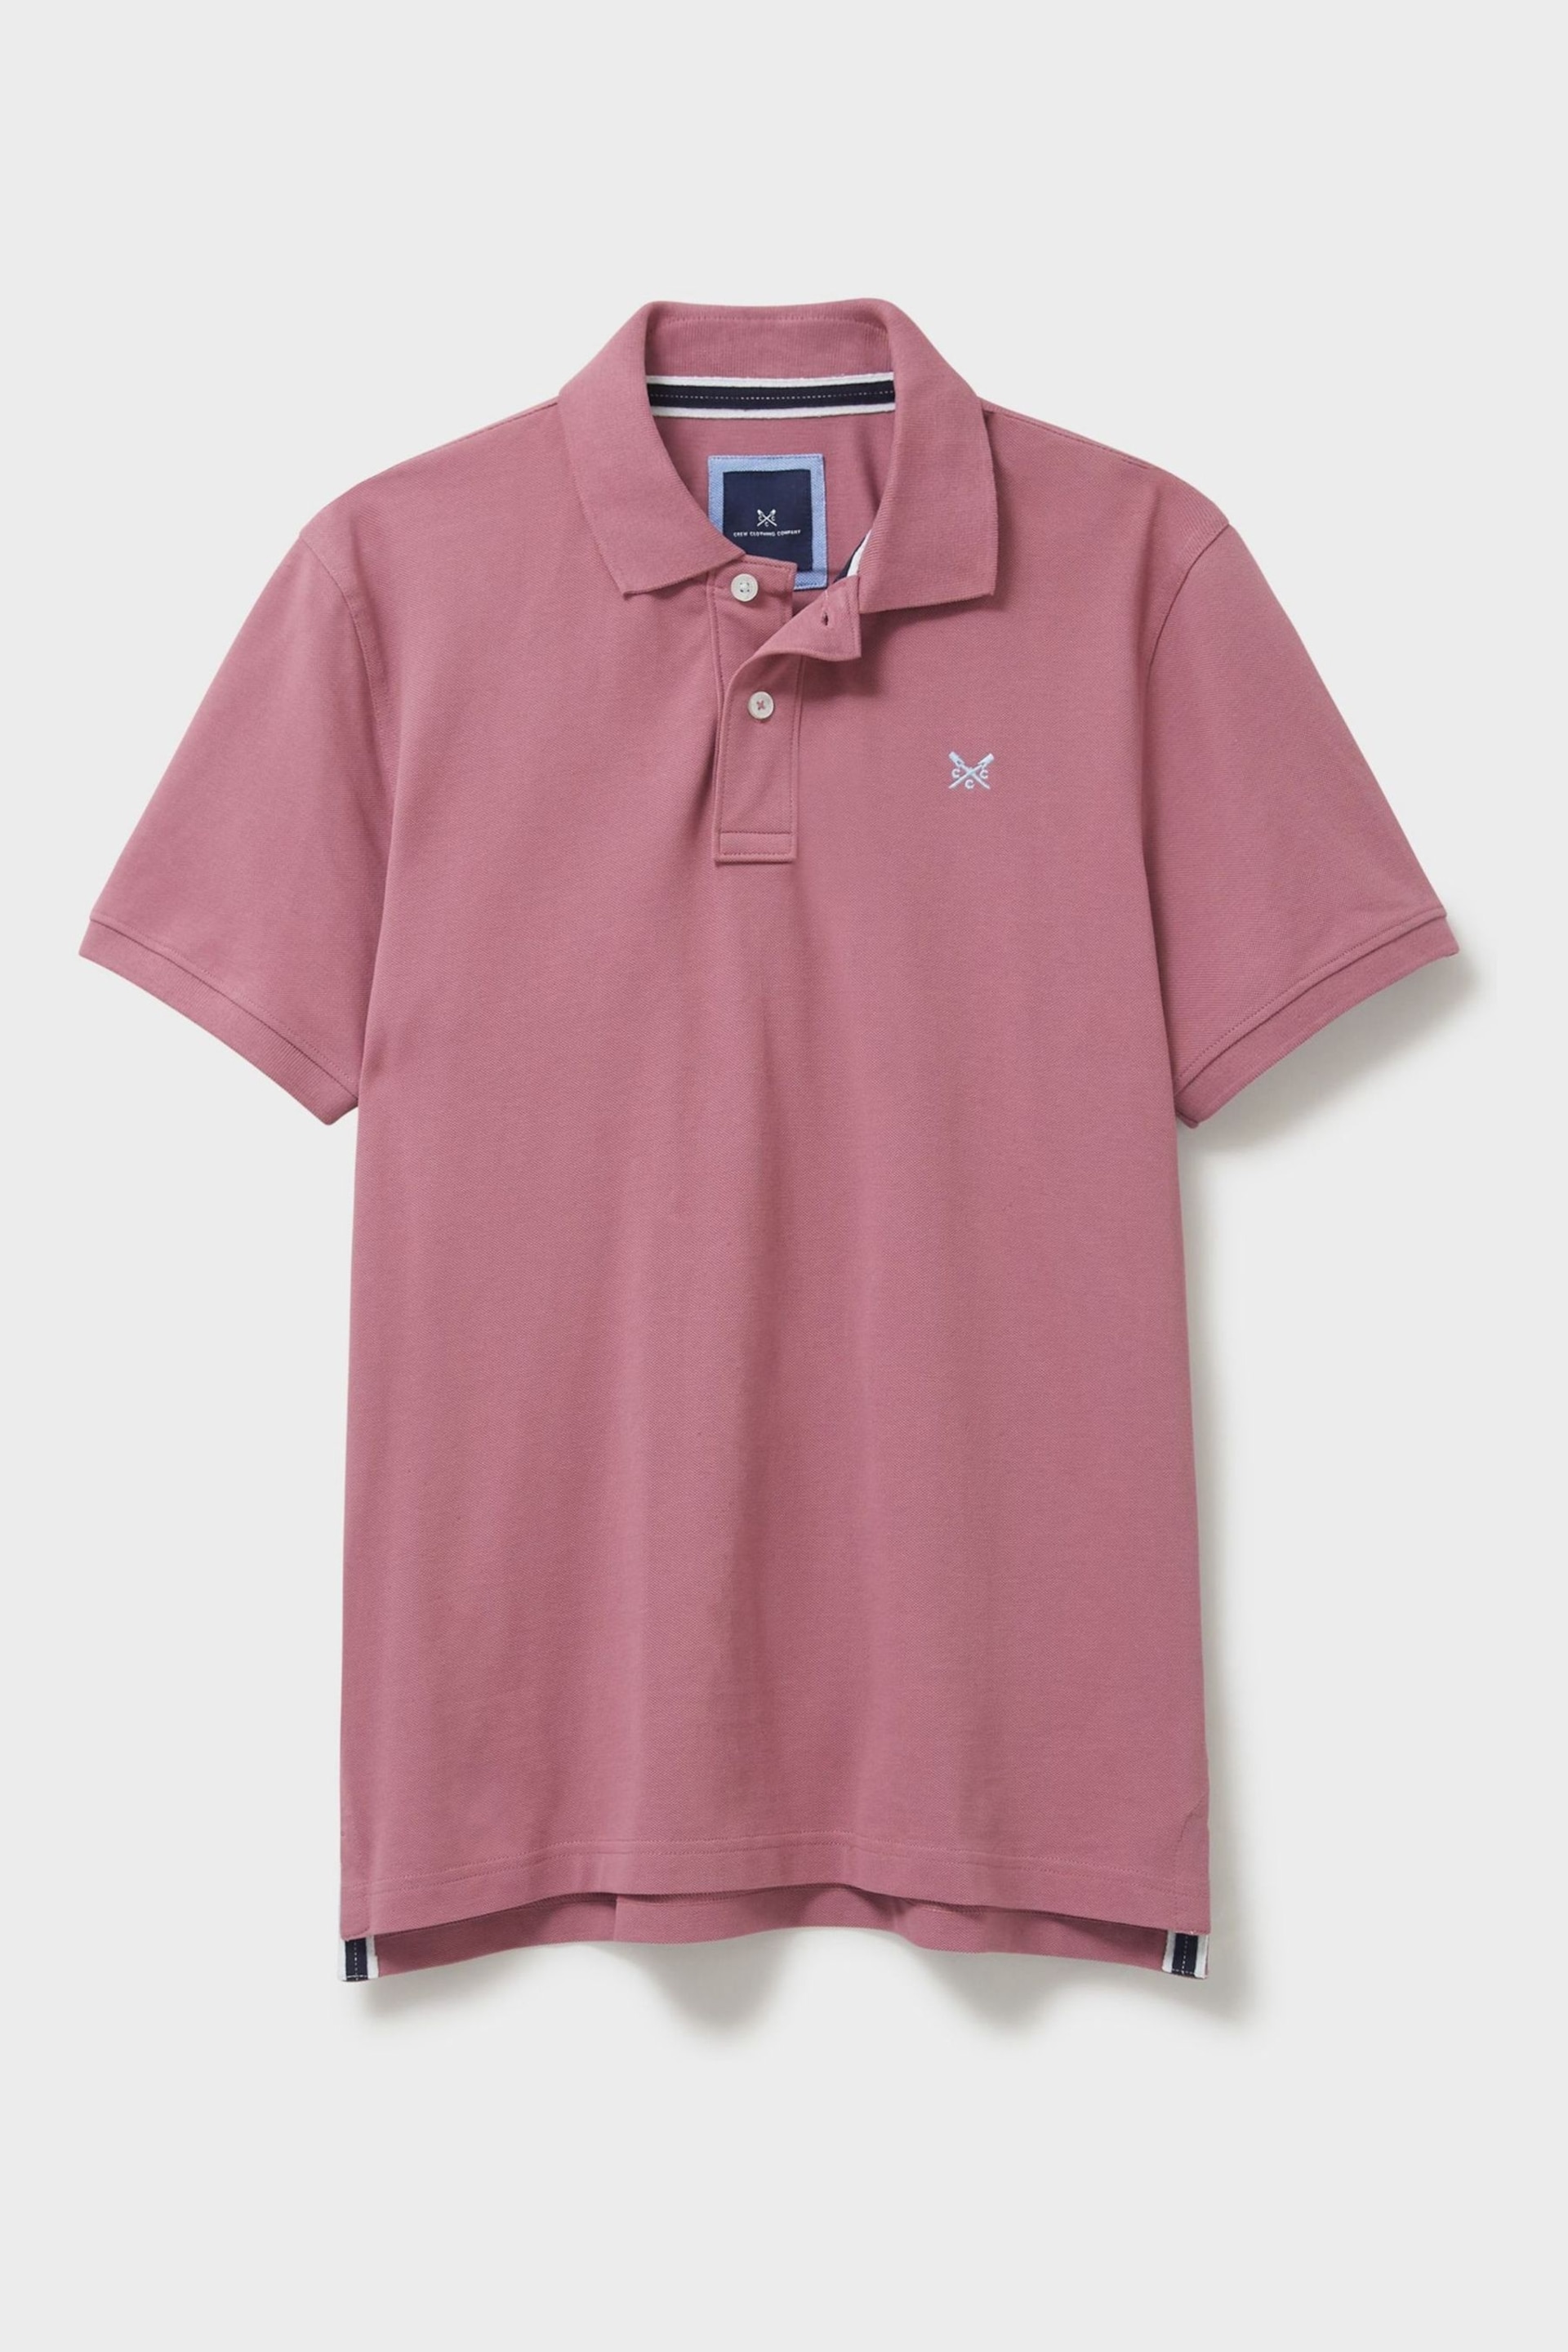 Crew Clothing Classic Pique Polo Shirt - Image 5 of 5